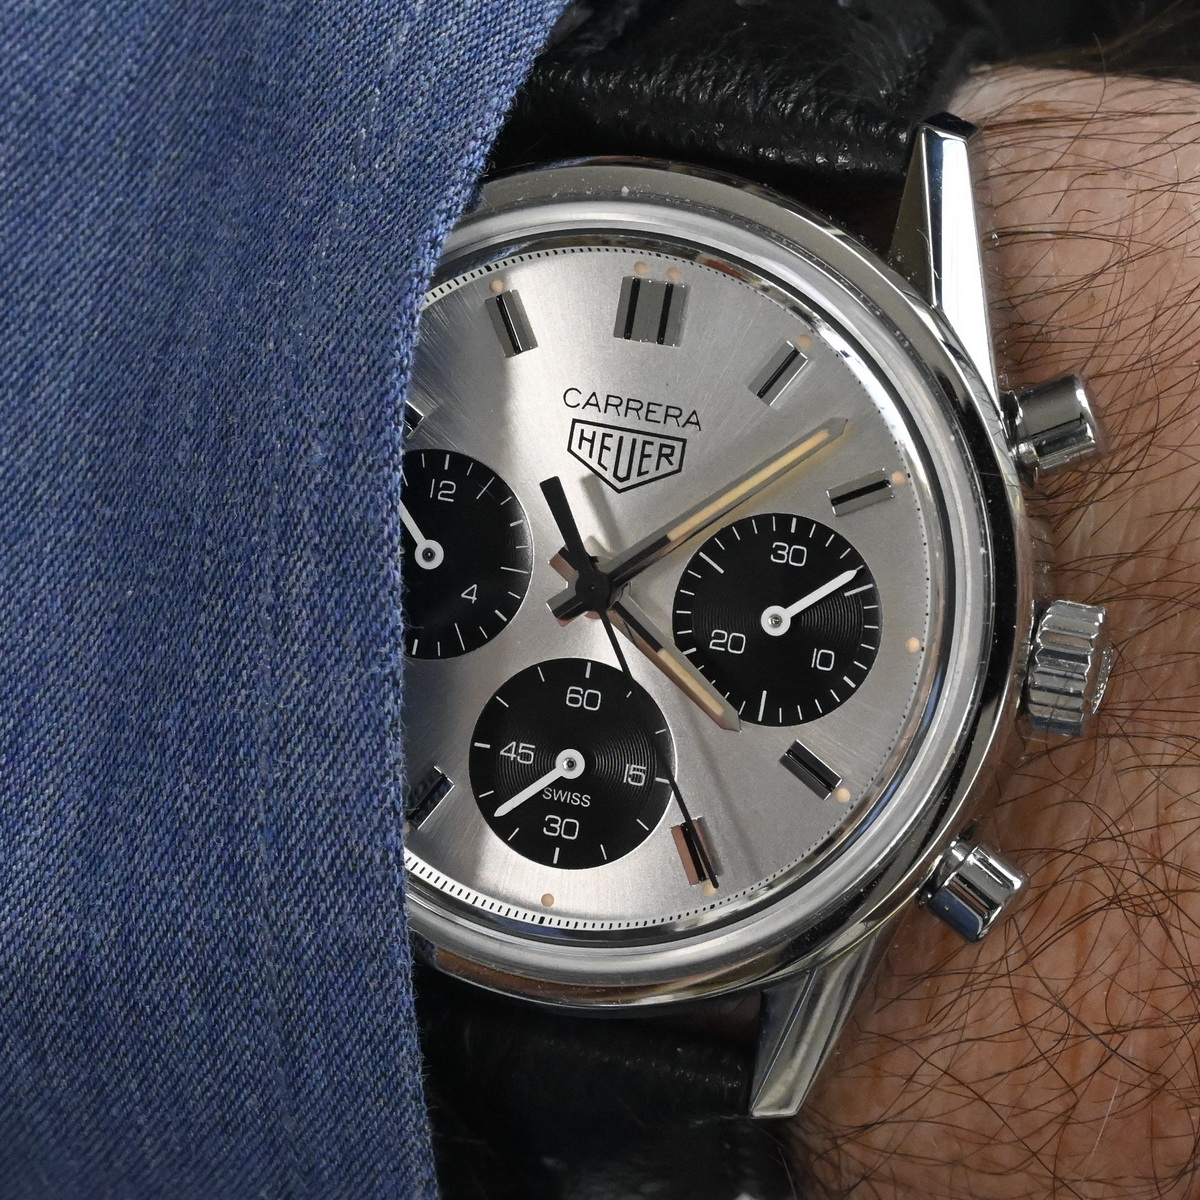 Introducing the Heuer Carrera 160th Anniversary Silver Limited Edition